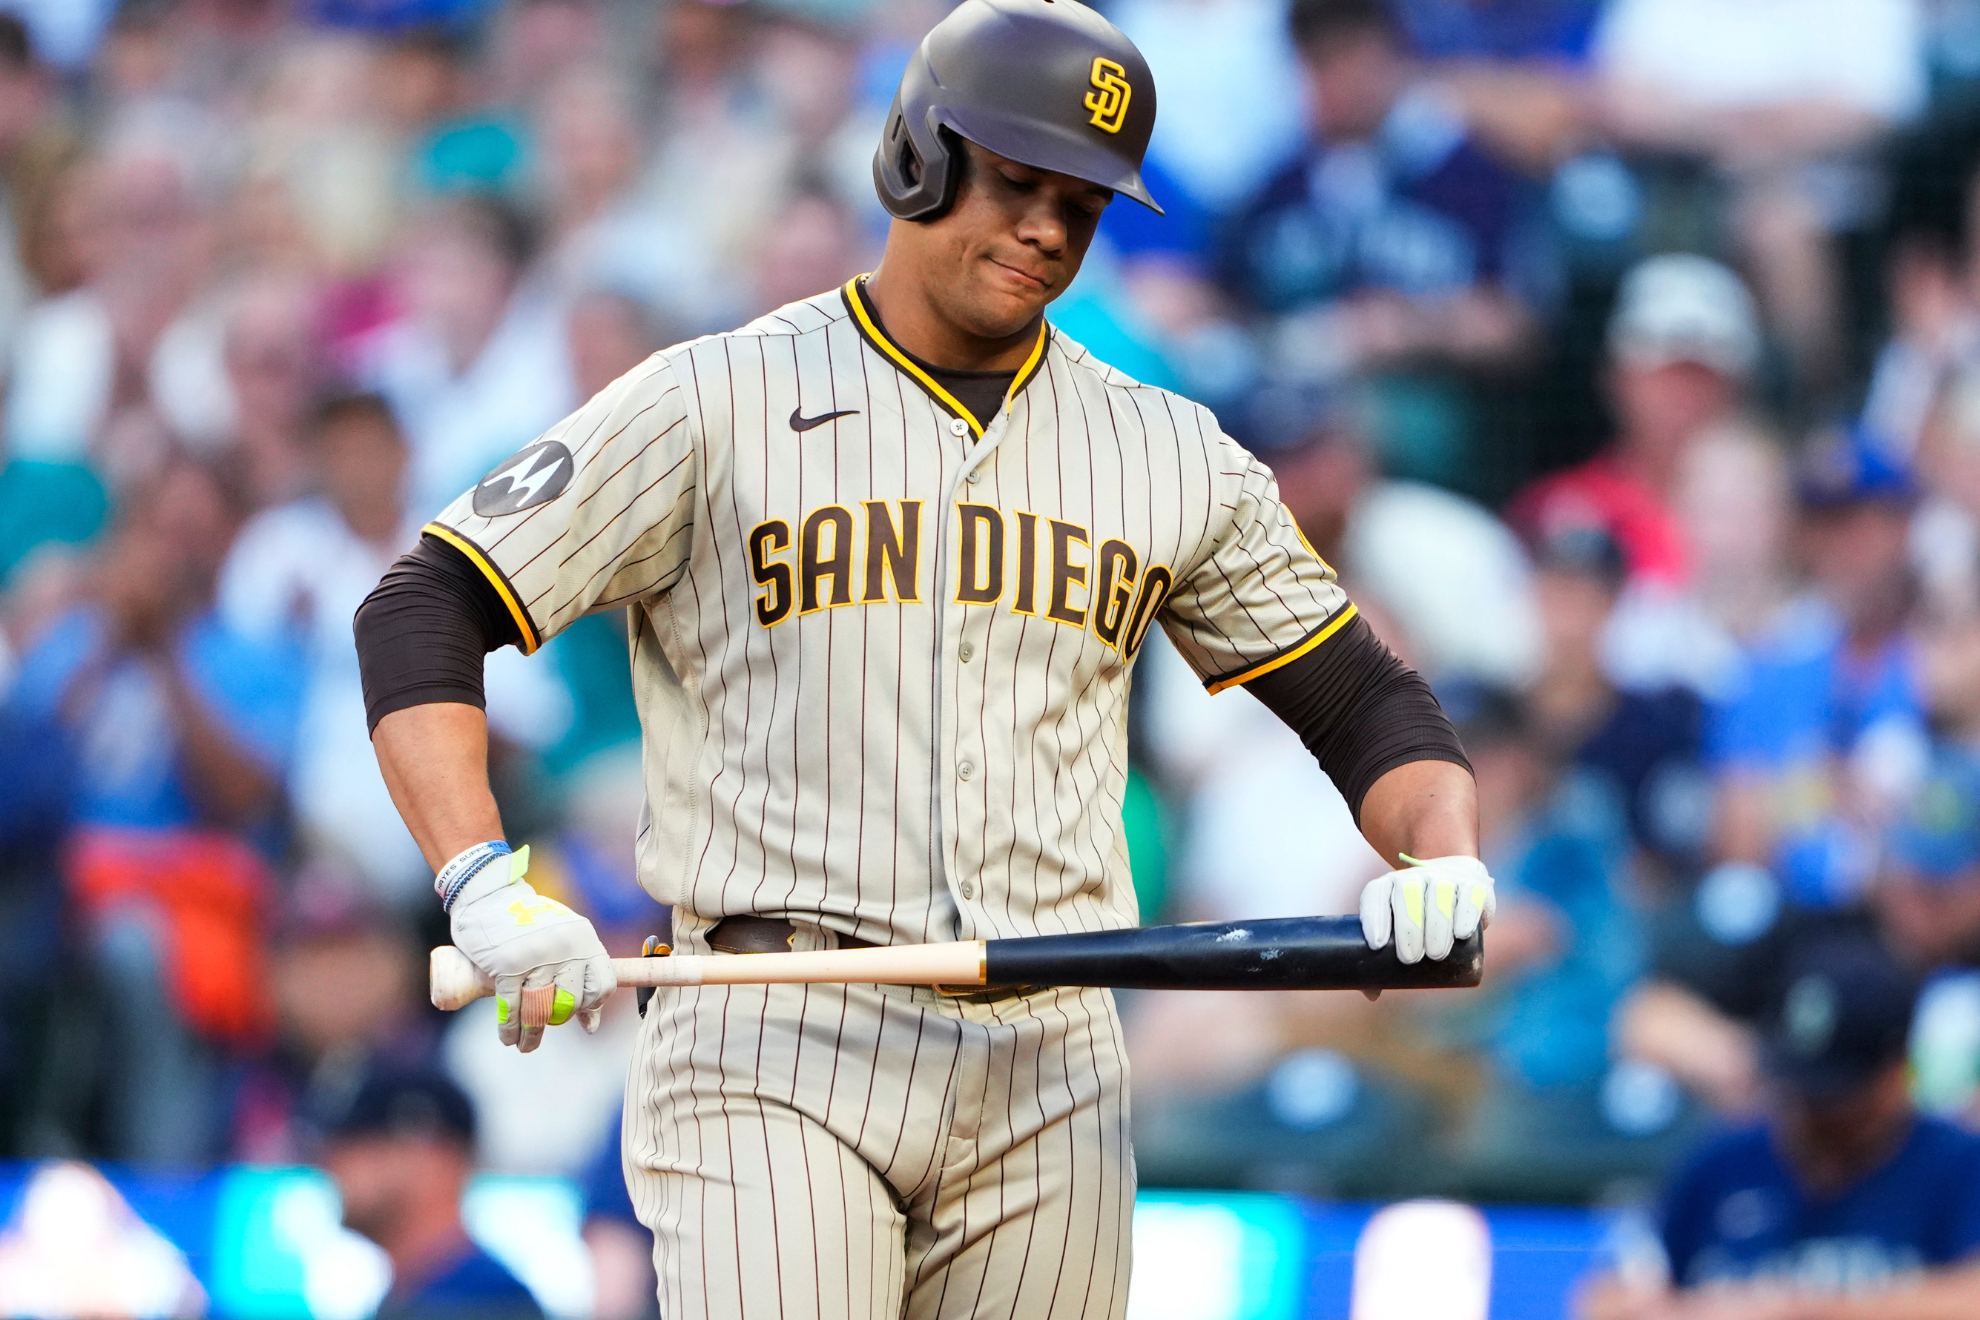 Soto and the Padres have labored through a tough 2023 season.